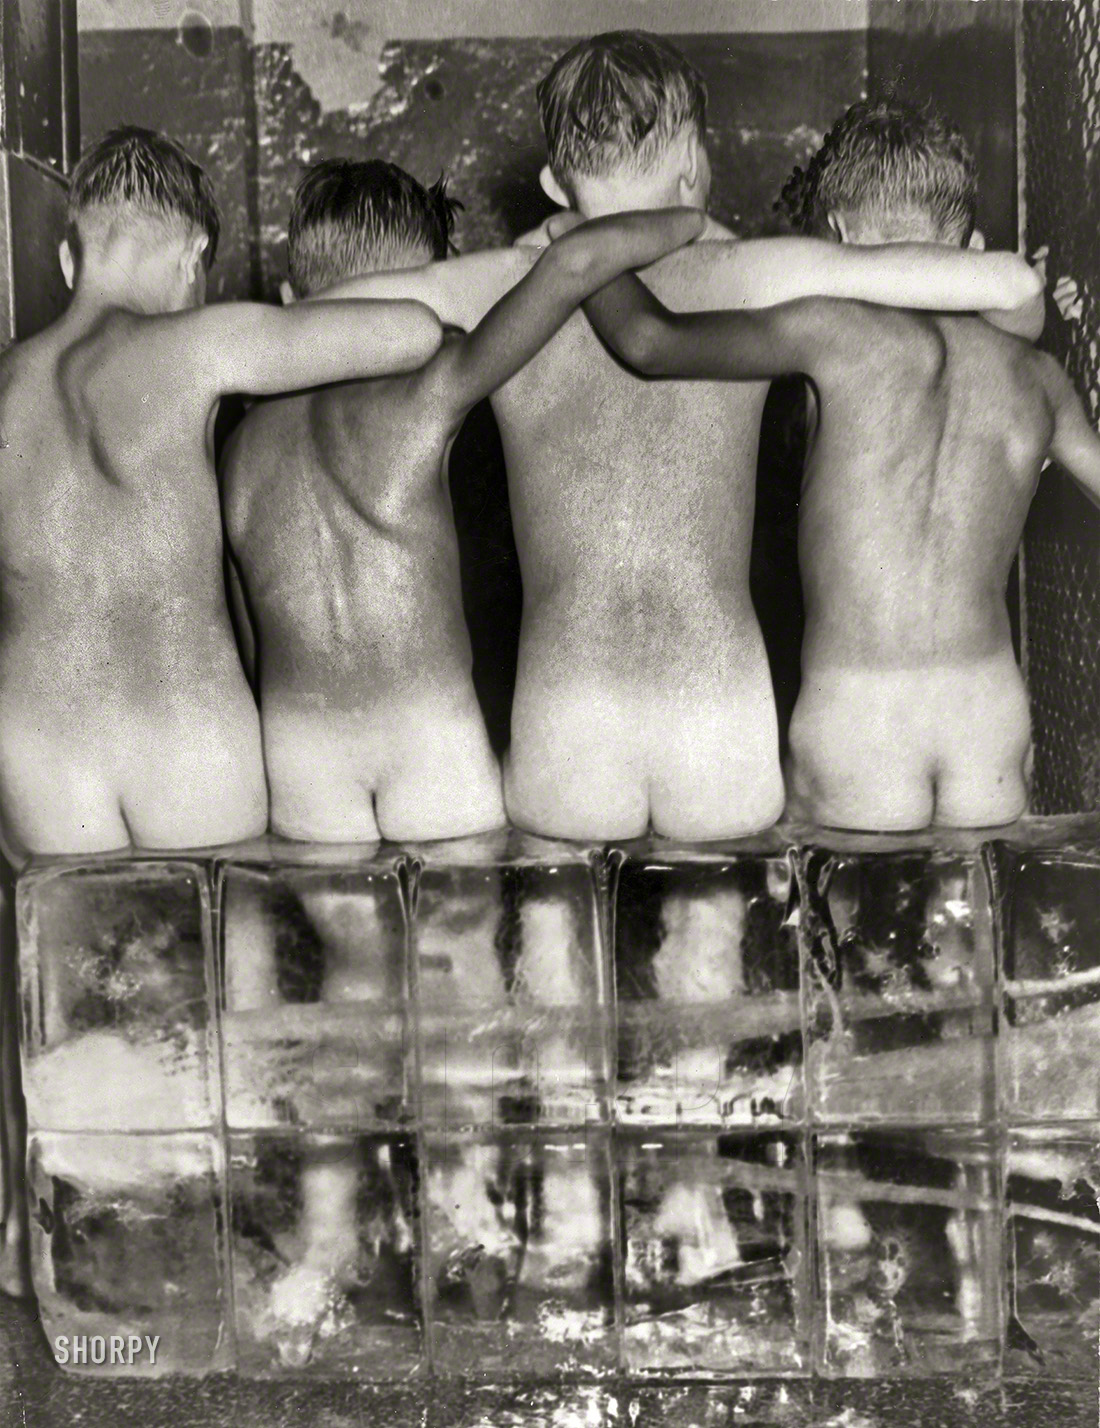 Washington, D.C., circa 1950. "Four naked boys, viewed from behind, sitting on large blocks of ice." Photo by Aaron Miller. View full size.